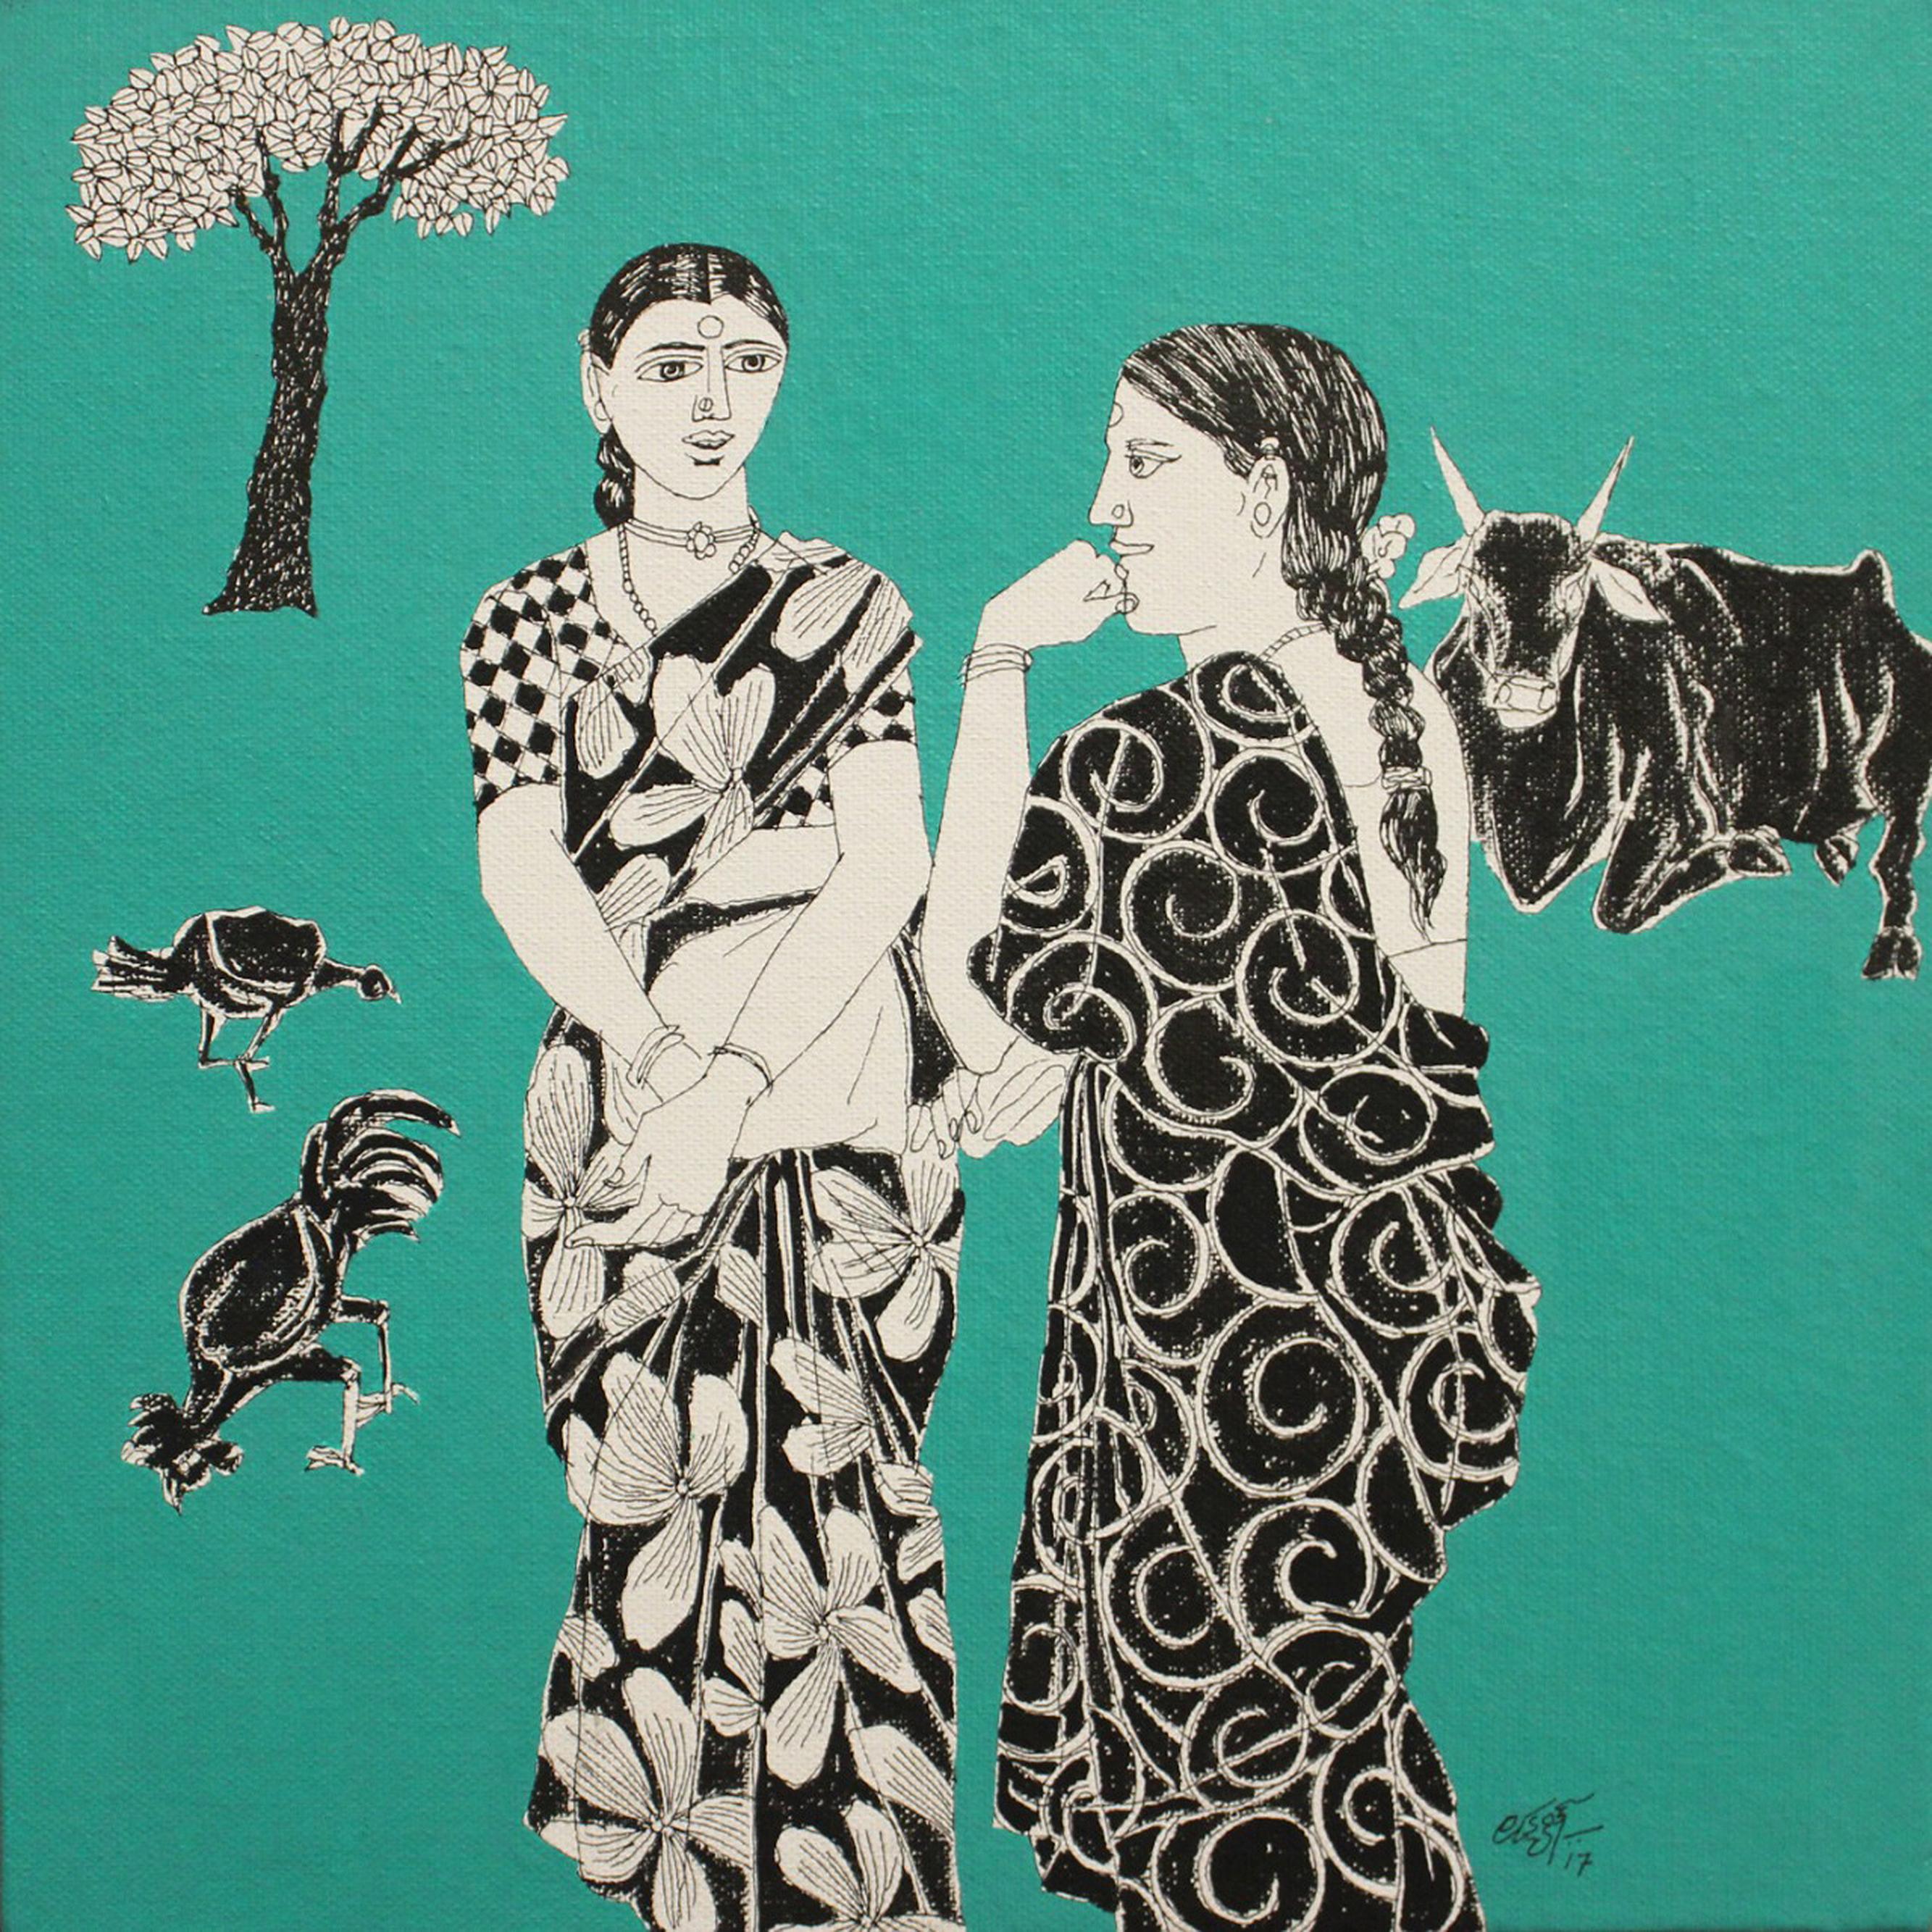 Laxman Aeley Portrait Painting - Village Women, Gossip, Acrylic on Canvas, Red by South Indian Artist "In Stock"